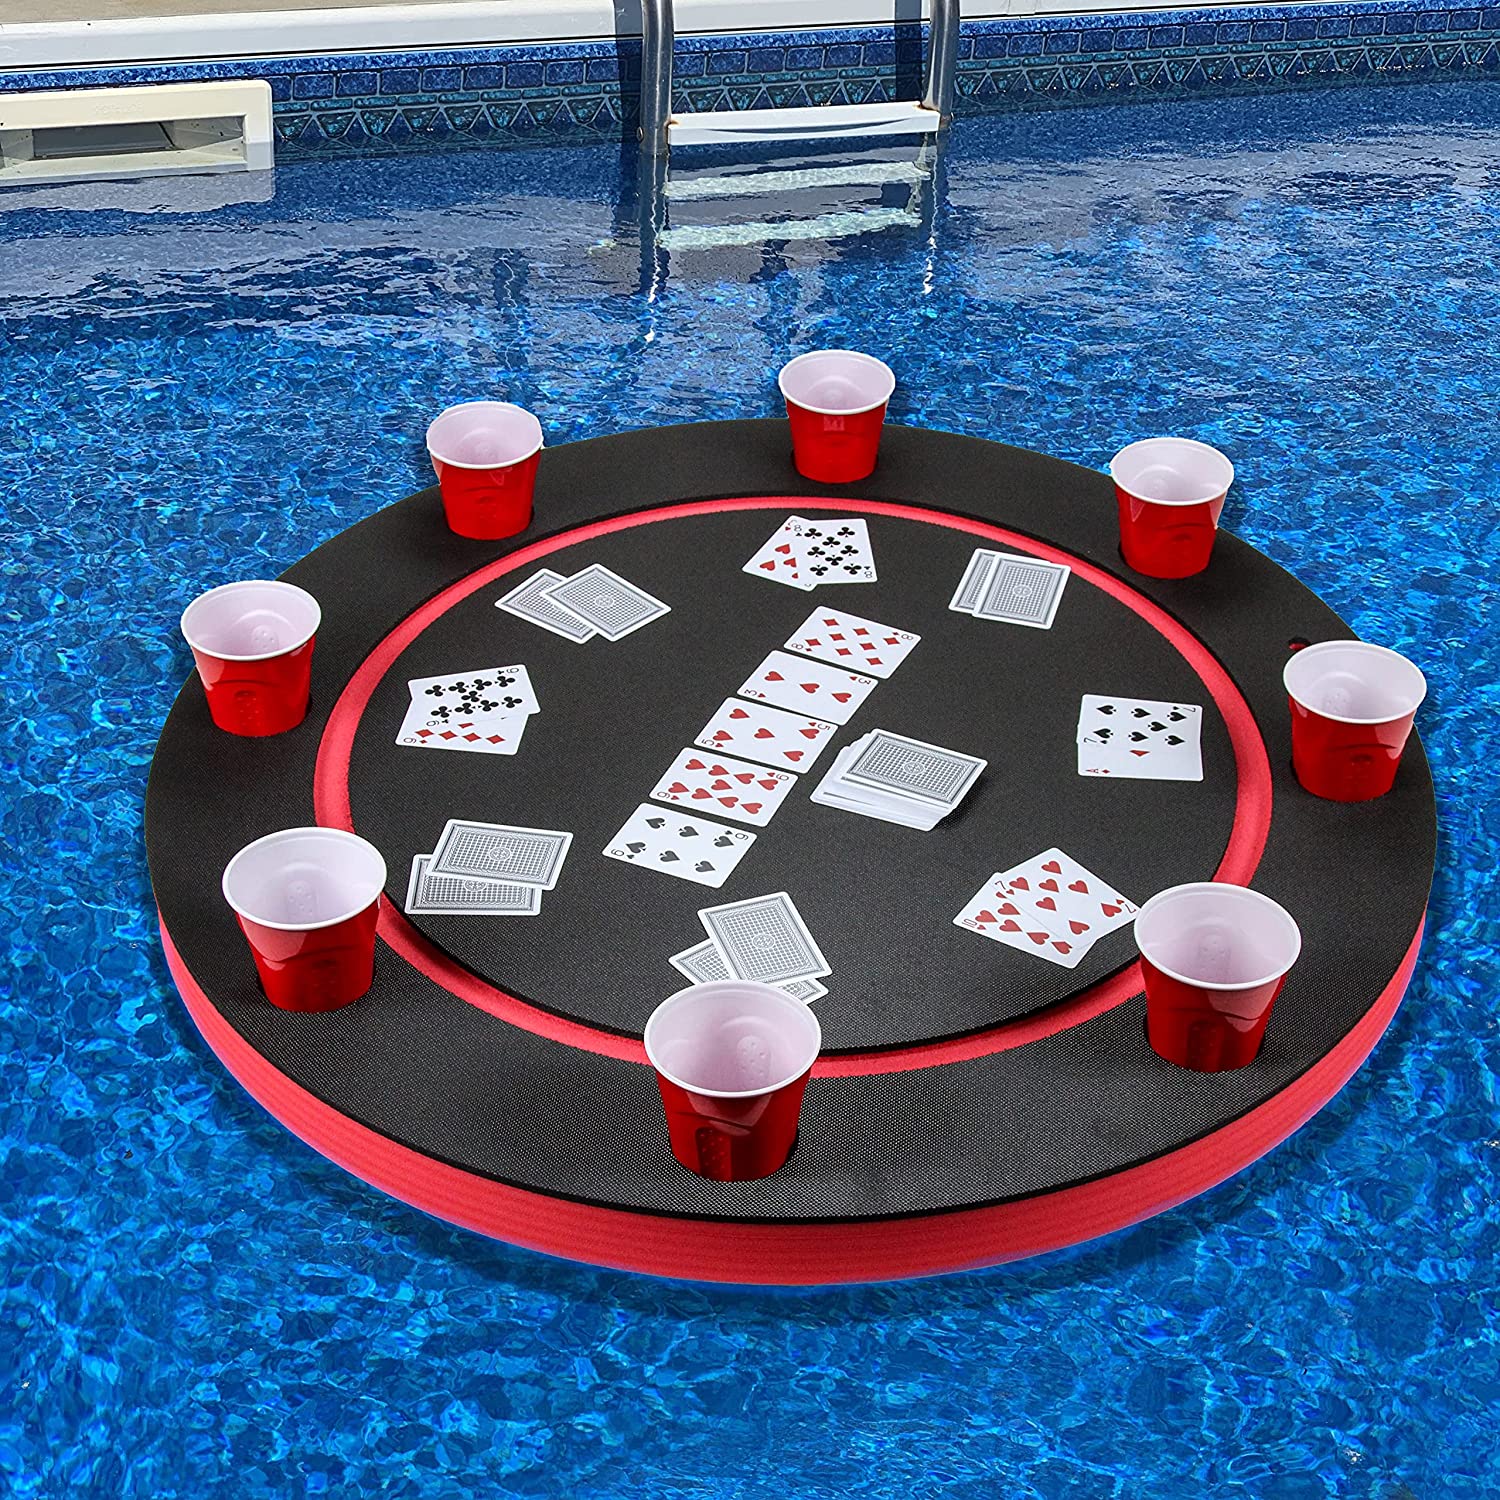 Polar Whale Red & Black Color Floating Game or Card Table Tray for Pool or Beach Party Float Lounge